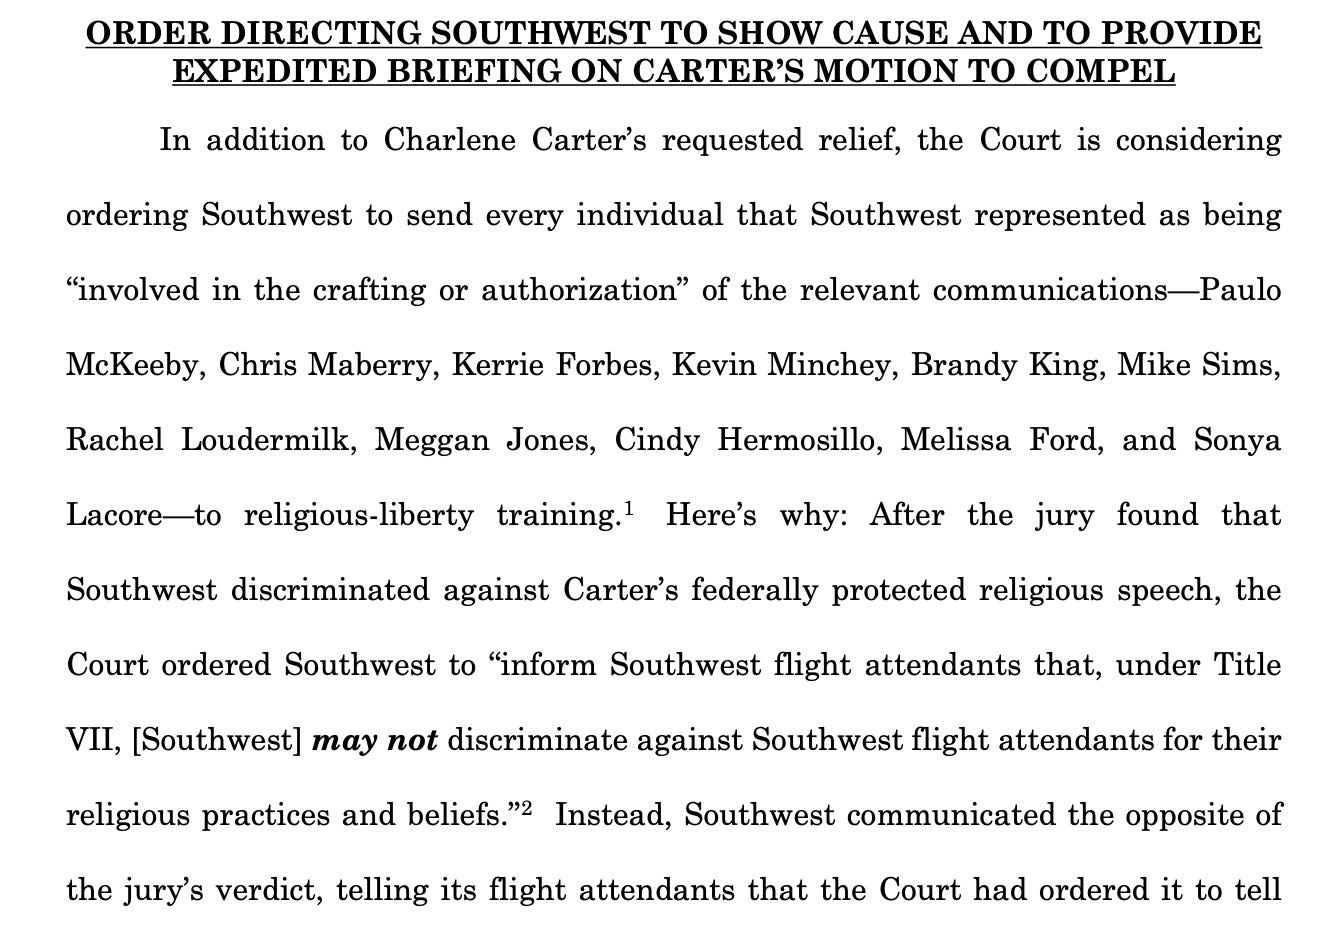 ORDER DIRECTING SOUTHWEST TO SHOW CAUSE AND TO PROVIDE EXPEDITED BRIEFING ON CARTER’S MOTION TO COMPEL In addition to Charlene Carter’s requested relief, the Court is considering ordering Southwest to send every individual that Southwest represented as being “involved in the crafting or authorization” of the relevant communications—Paulo McKeeby, Chris Maberry, Kerrie Forbes, Kevin Minchey, Brandy King, Mike Sims, Rachel Loudermilk, Meggan Jones, Cindy Hermosillo, Melissa Ford, and Sonya Lacore—to religious-liberty training.1  Here’s why: After the jury found that Southwest discriminated against Carter’s federally protected religious speech, the Court ordered Southwest to “inform Southwest flight attendants that, under Title VII, [Southwest] may not discriminate against Southwest flight attendants for their religious practices and beliefs.”2  Instead, Southwest communicated the opposite of the jury’s verdict, telling its flight attendants that the Court had ordered it to tell 